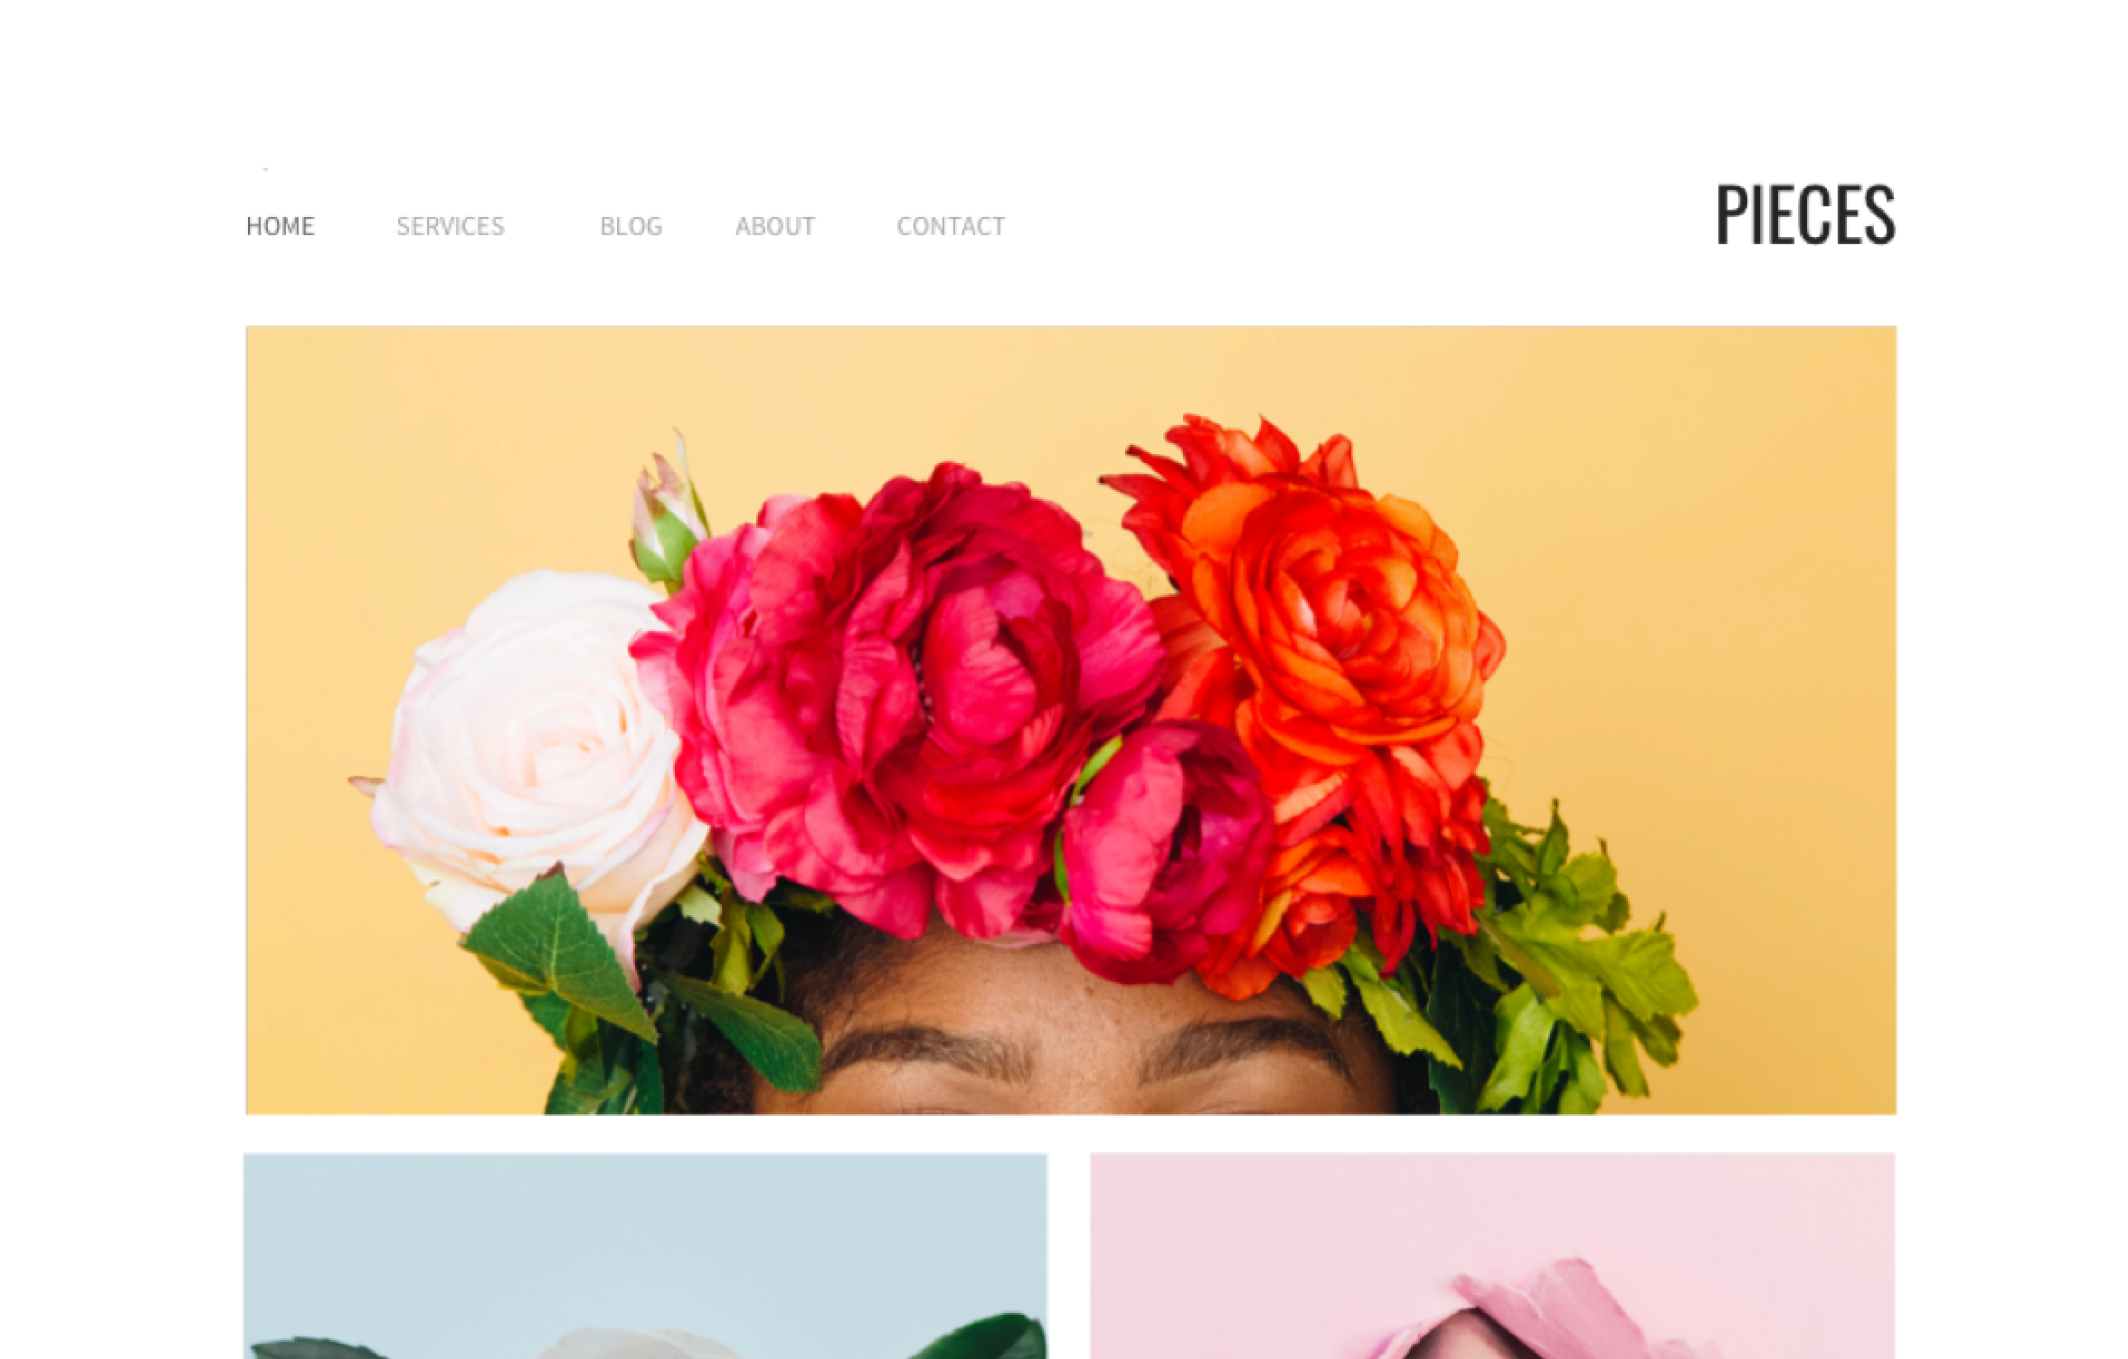 website template showing users art pieces and image designs to build their website